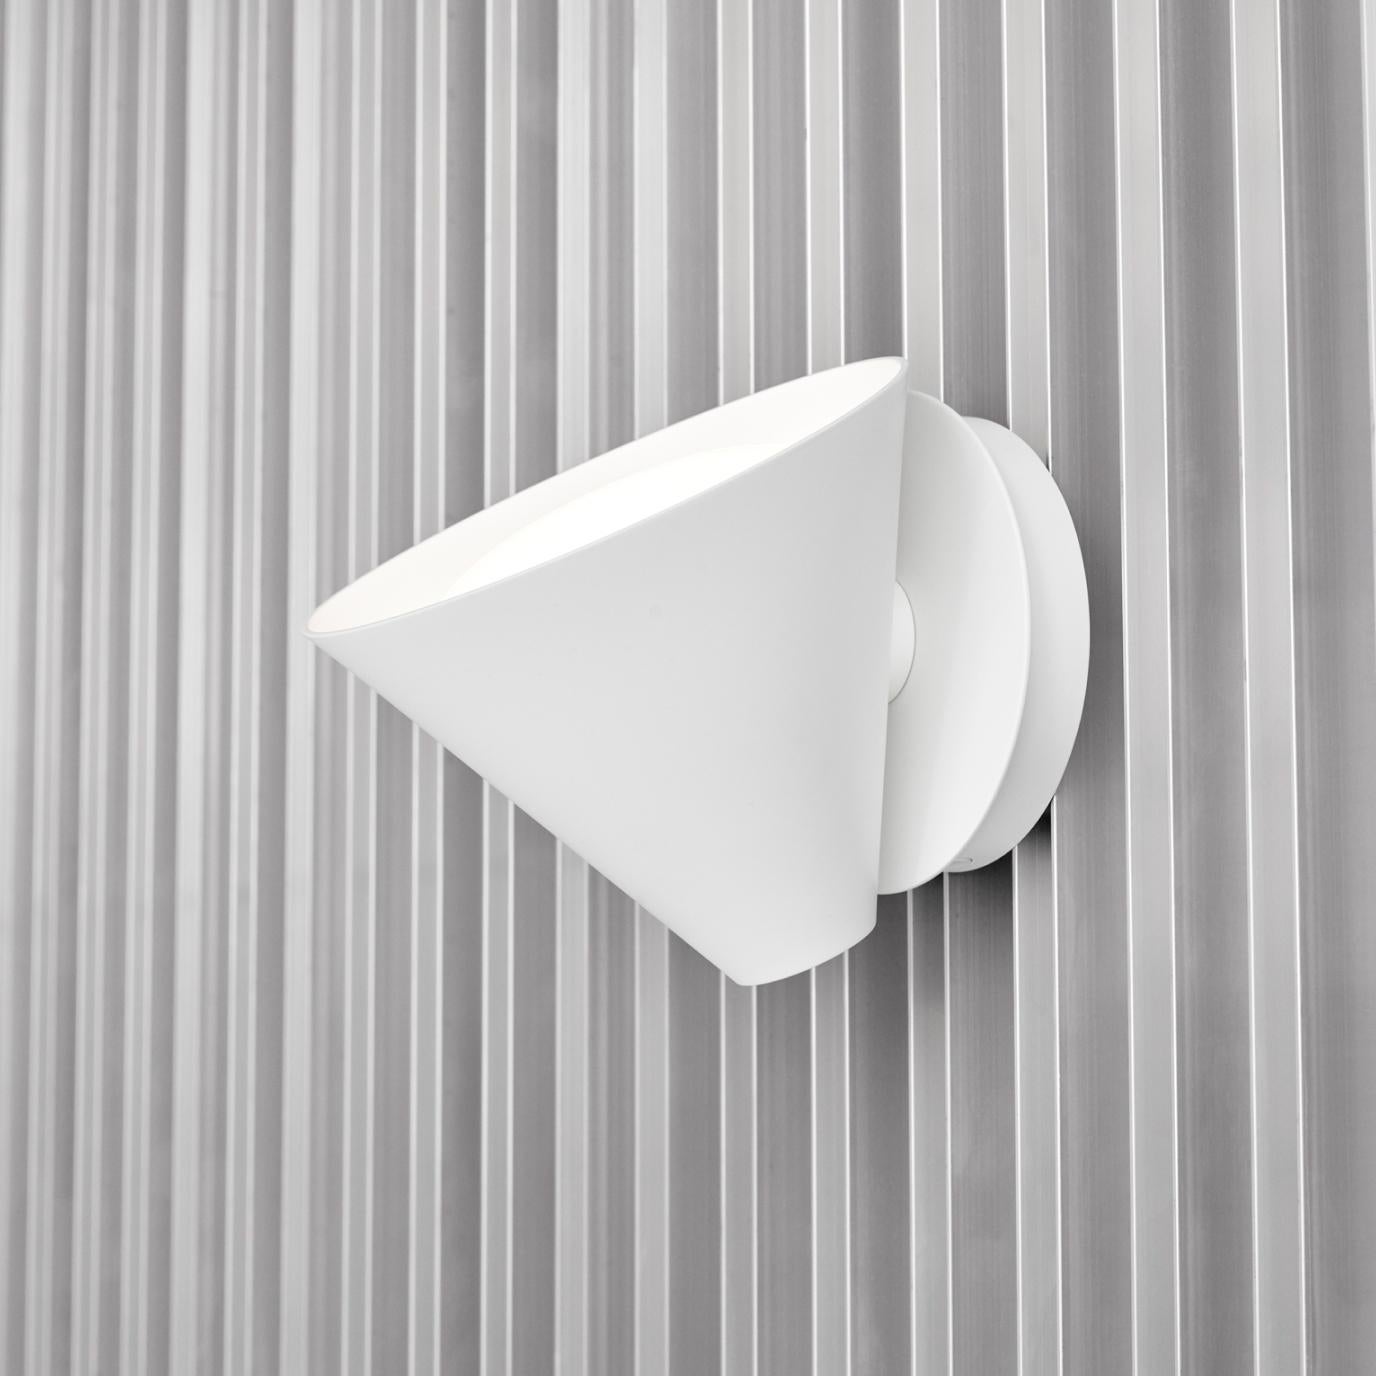 'Keglen' wall lamp for Louis Poulsen in White.

Keglen was created by Big Ideas in collaboration with Louis Poulsen in 2017. 
Bjarke Ingels, Jakob Lange and the design team from Big Ideas wanted to create a family of lamps with the same qualities